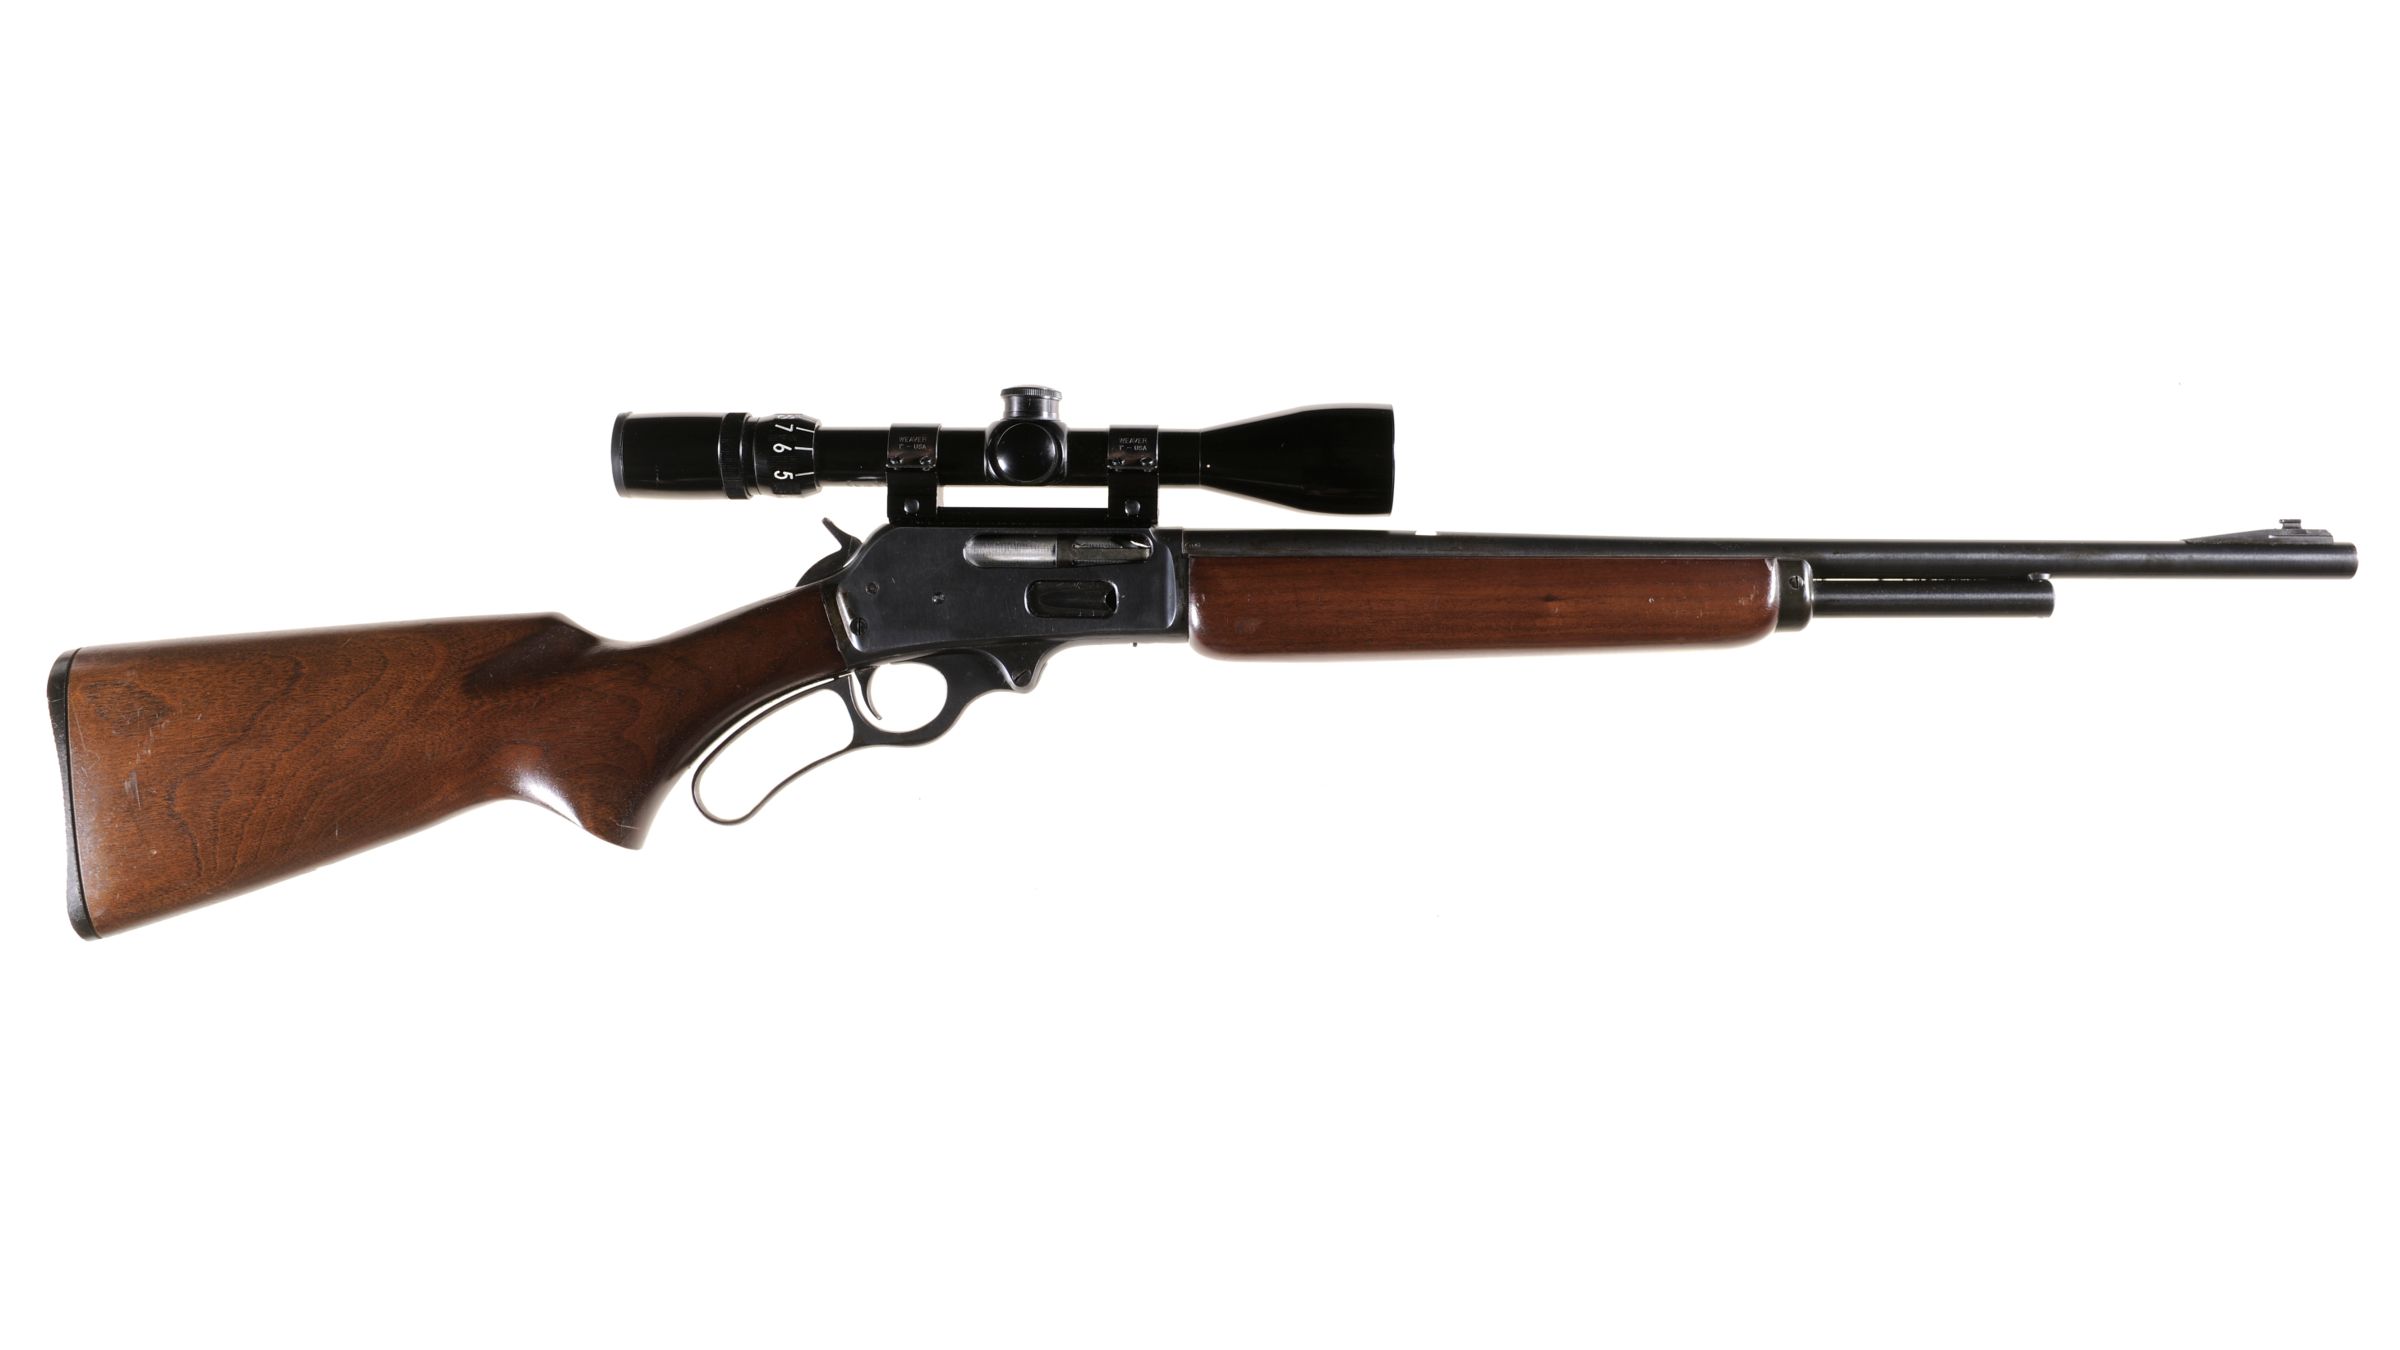 marlin-model-336-s-c-lever-action-carbine-with-scope